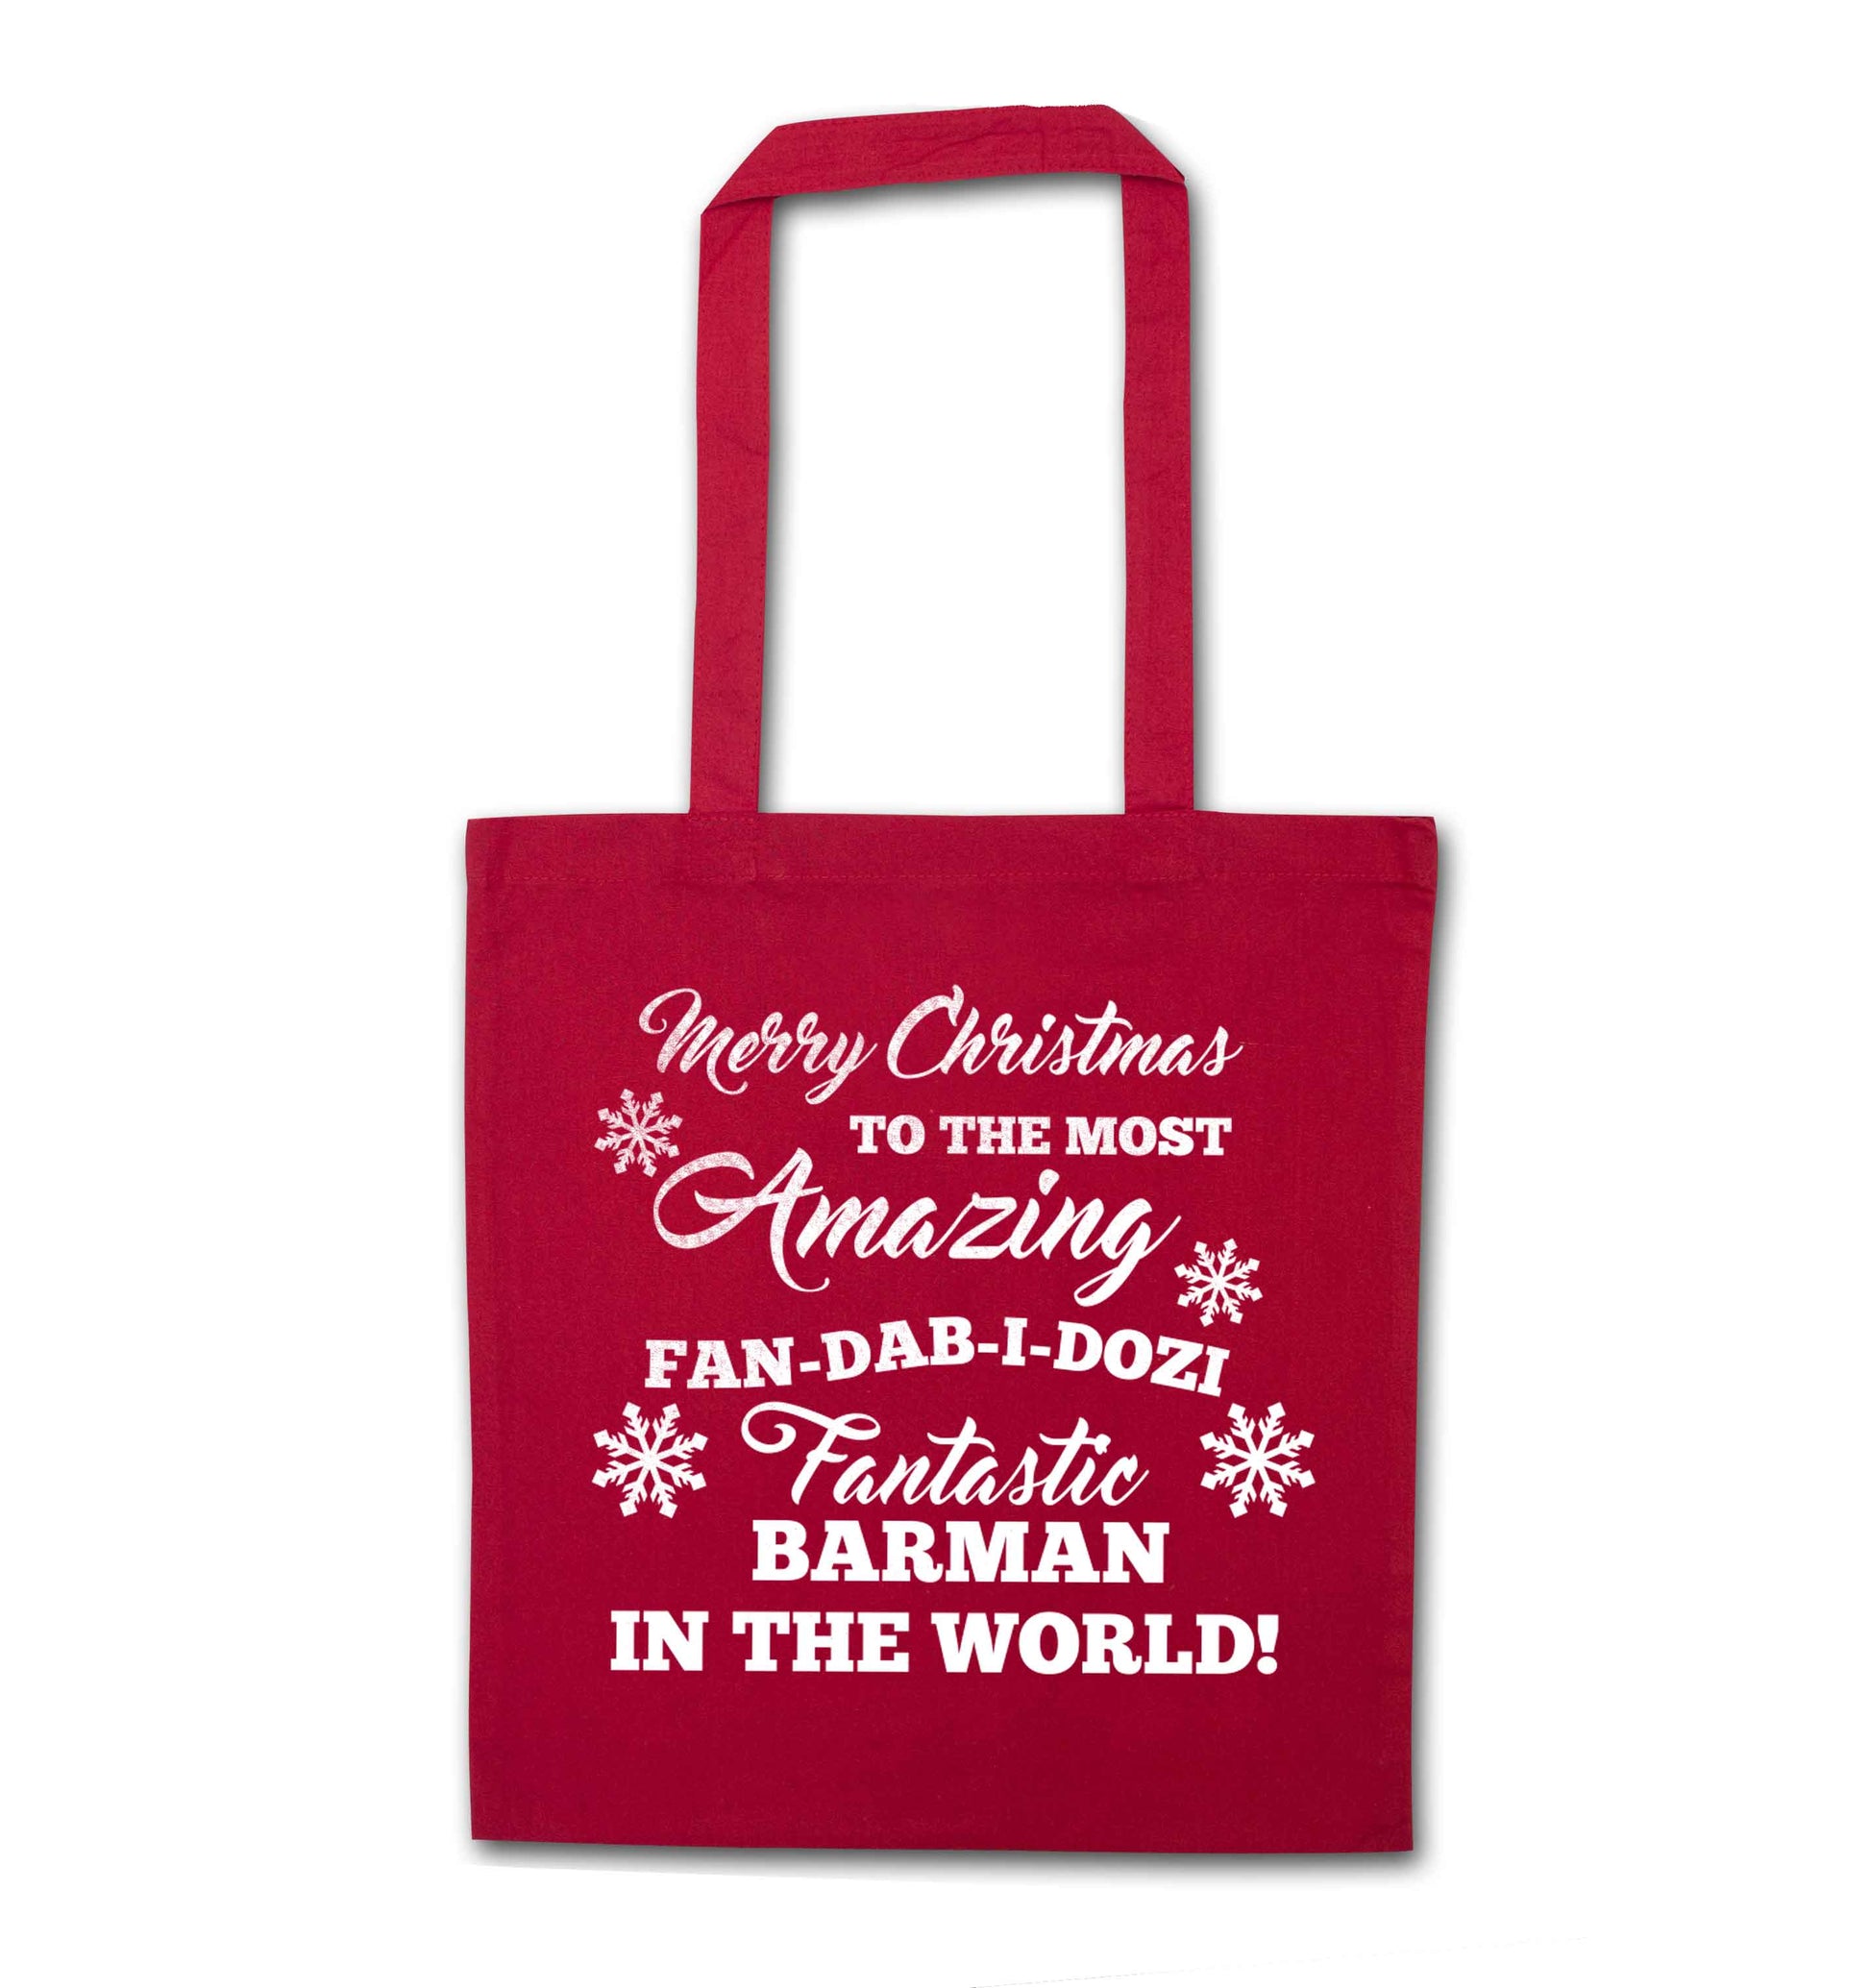 Merry Christmas to the most amazing barman in the world! red tote bag